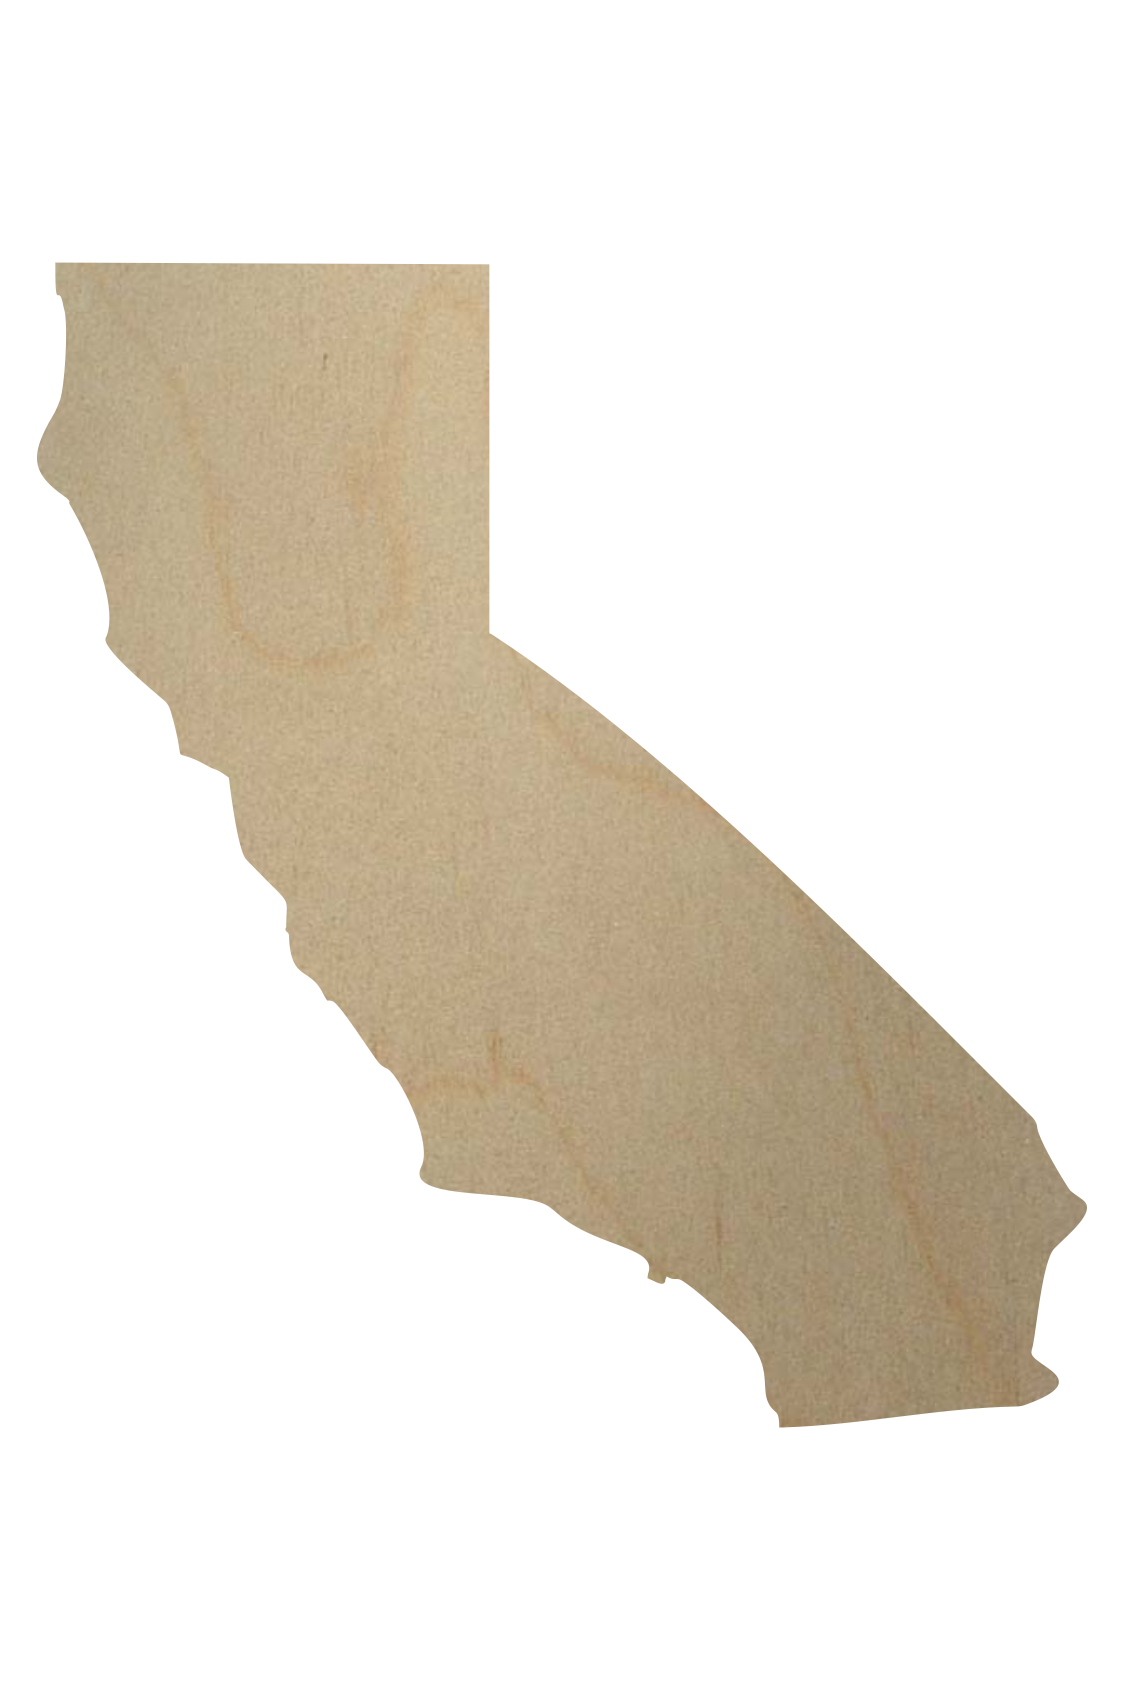 California state wood shape cutout for craft projects, decorating or creati...